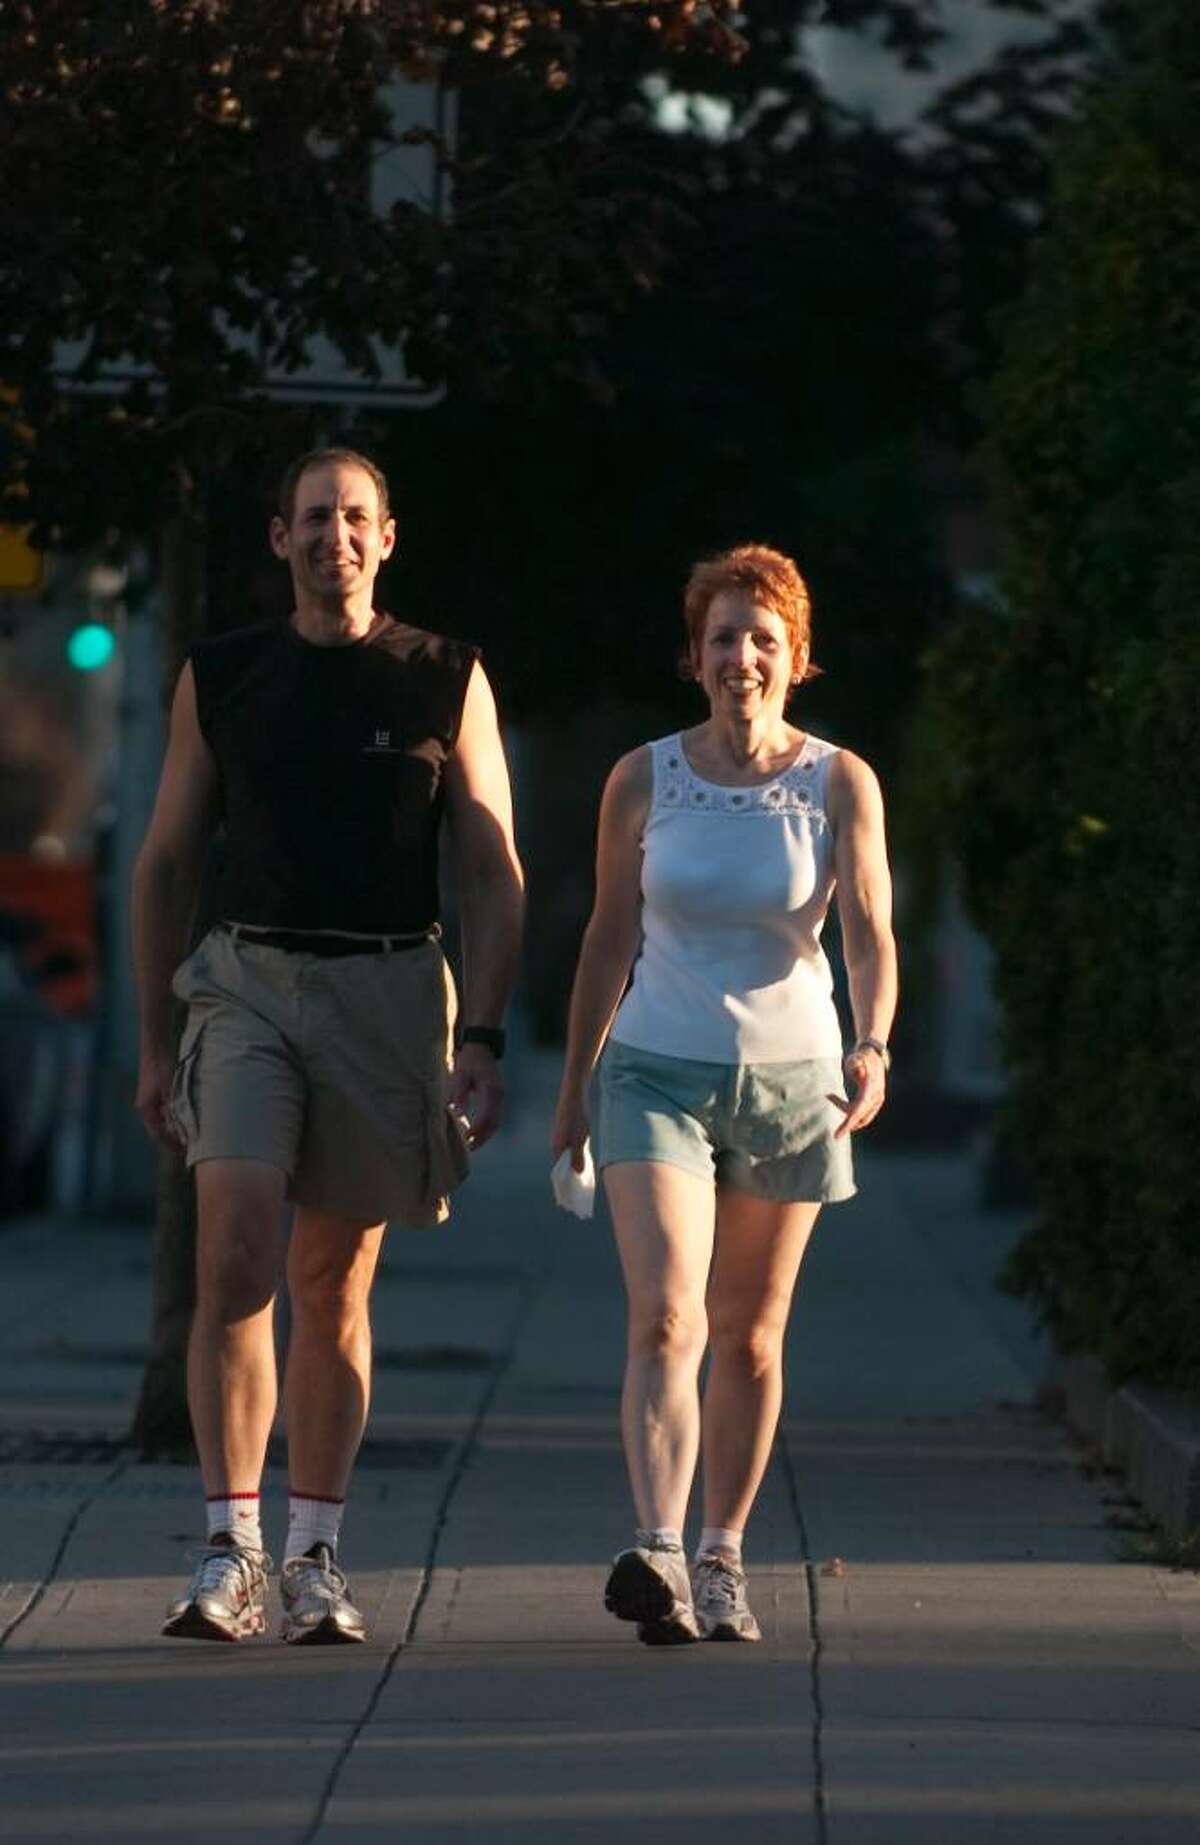 Myles Cohen, 58, and his wife Mary, 55, walk their usual route in downtown Stamford on Tuesday, September 1, 2009.